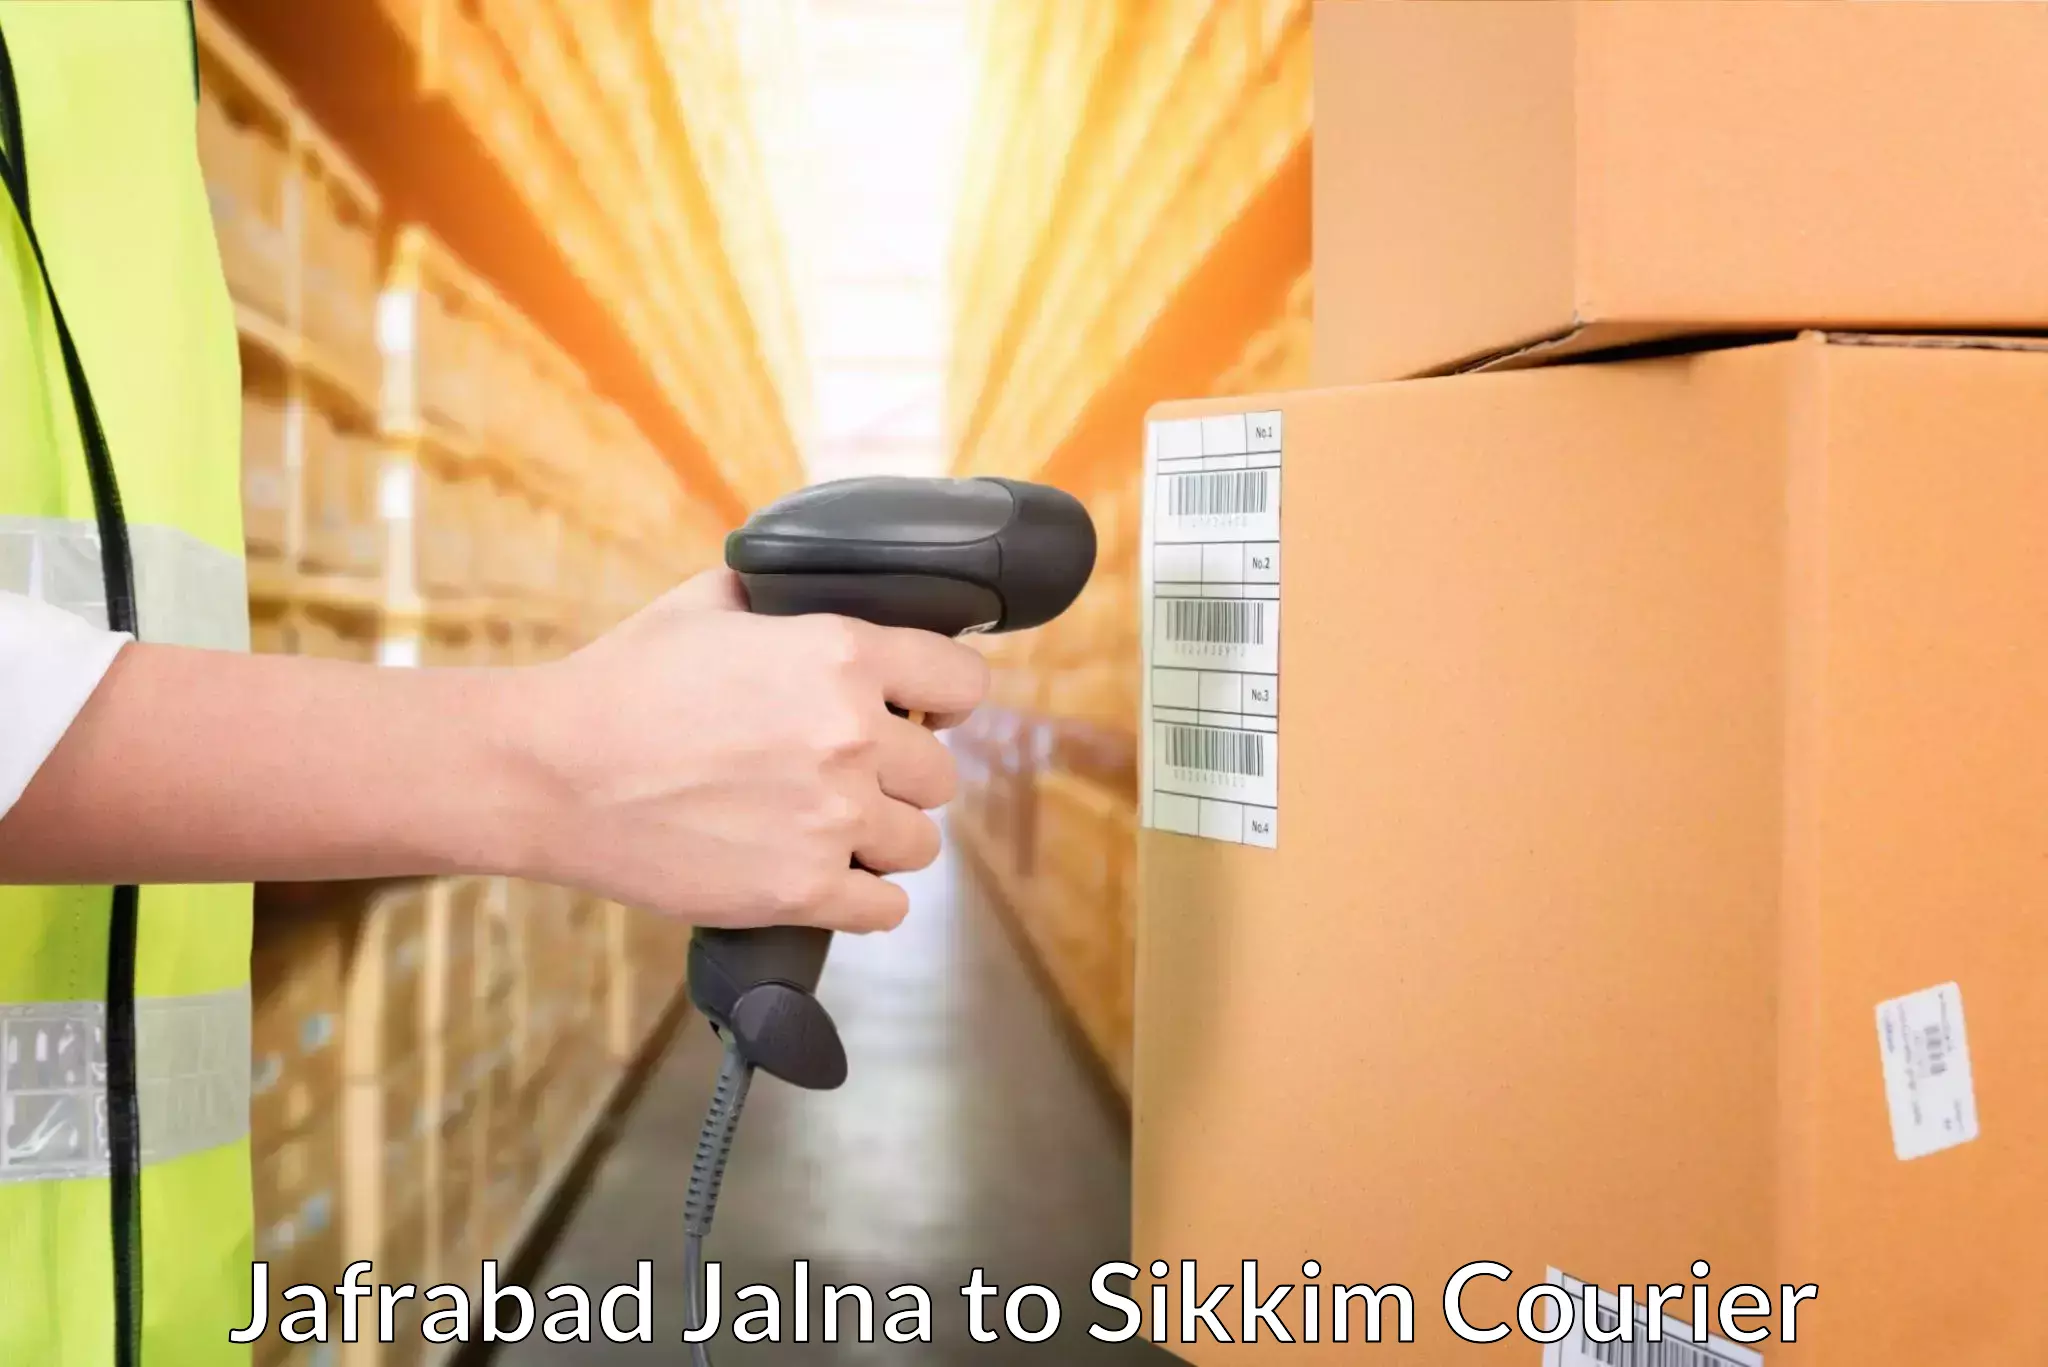 Large-scale shipping solutions Jafrabad Jalna to Mangan